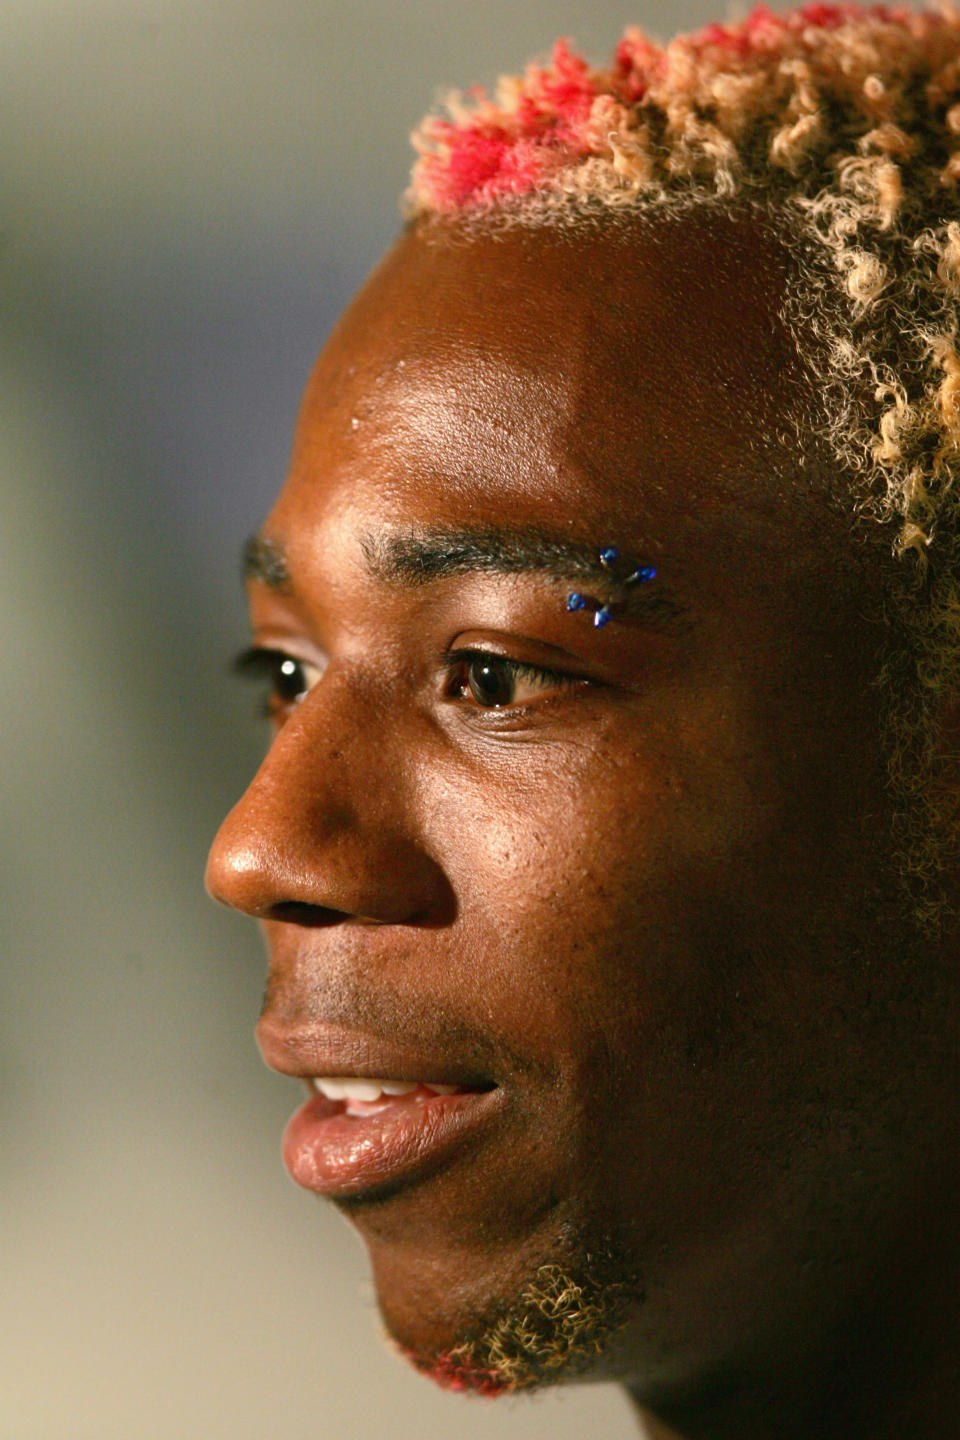 LONDON - JULY 13: Phillips Idowu is interviewed as the British Olympic Association announce the Athletics squad to represent Team GB at the Athens Olympic Games at the Millbank Tower media centre on July 13, 2004 in London, England. (Photo by Clive Rose/Getty Images)